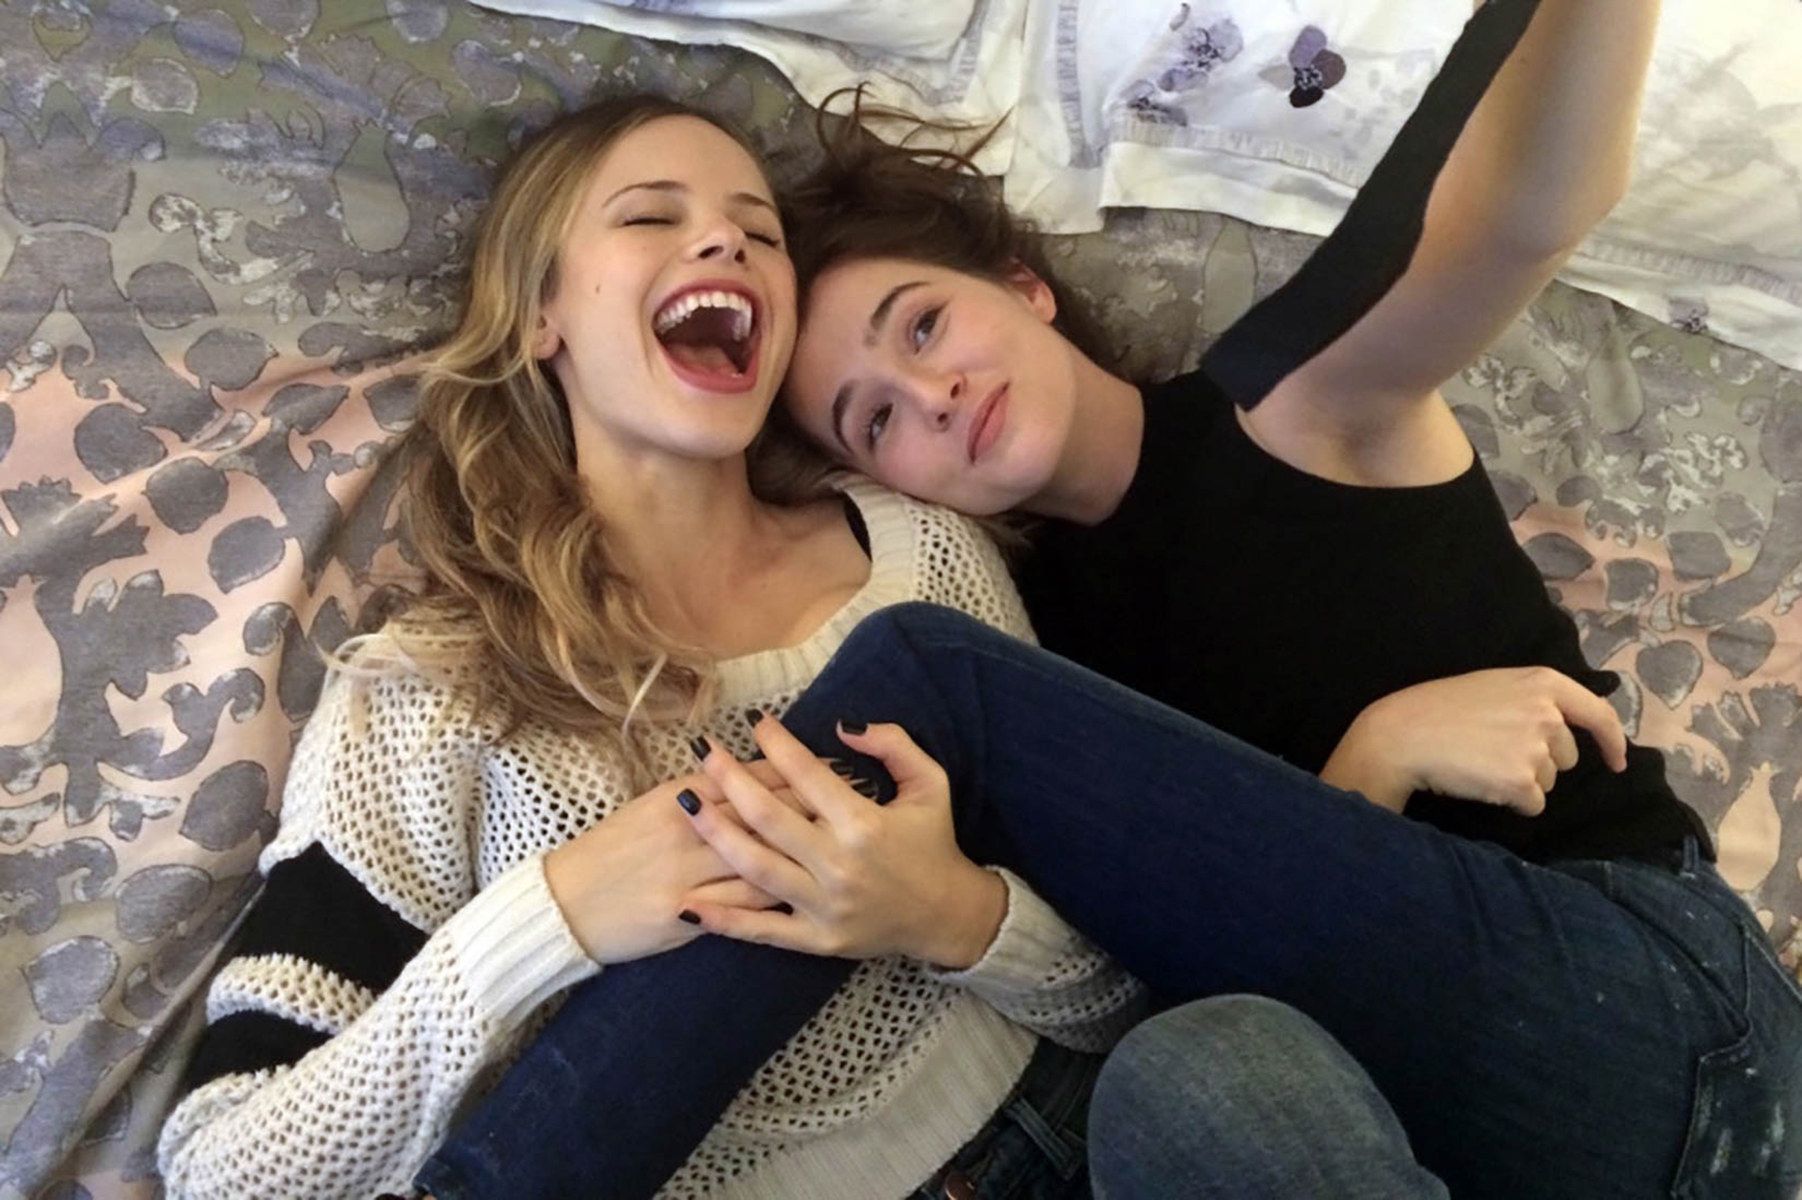 Lindsay and Samantha lying in bed together smiling